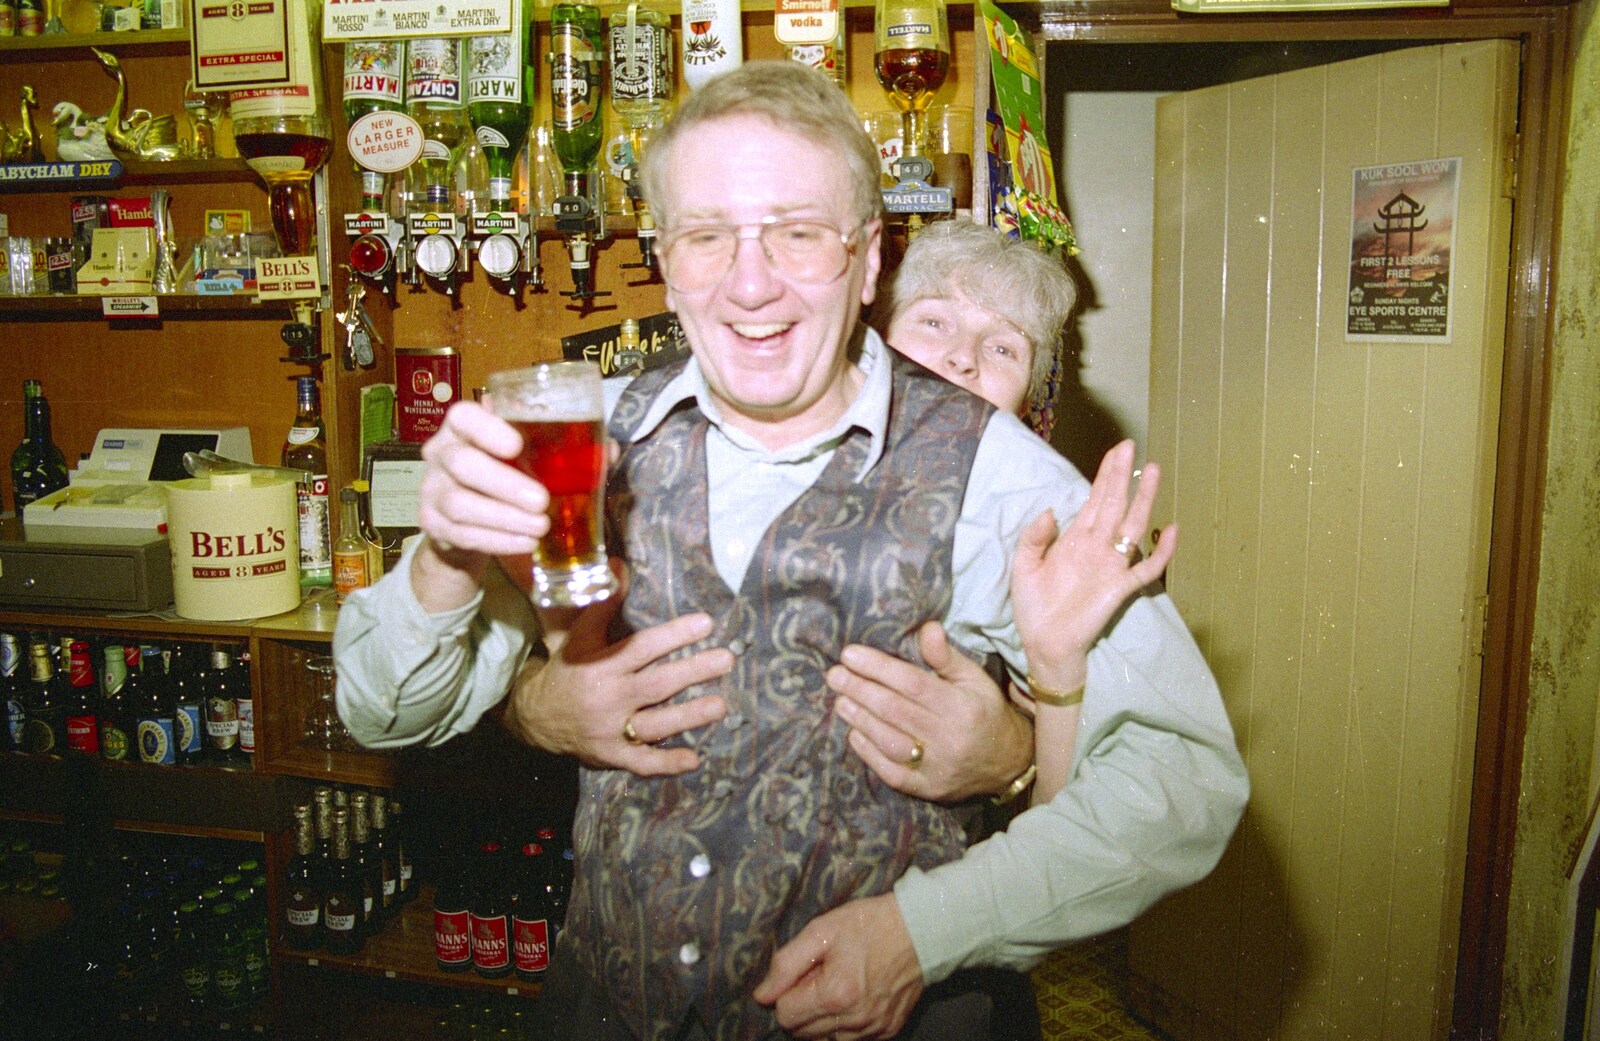 Spammy grabs John from behind from New Year's Eve in the Swan Inn, Brome, Suffolk - 31st December 1995